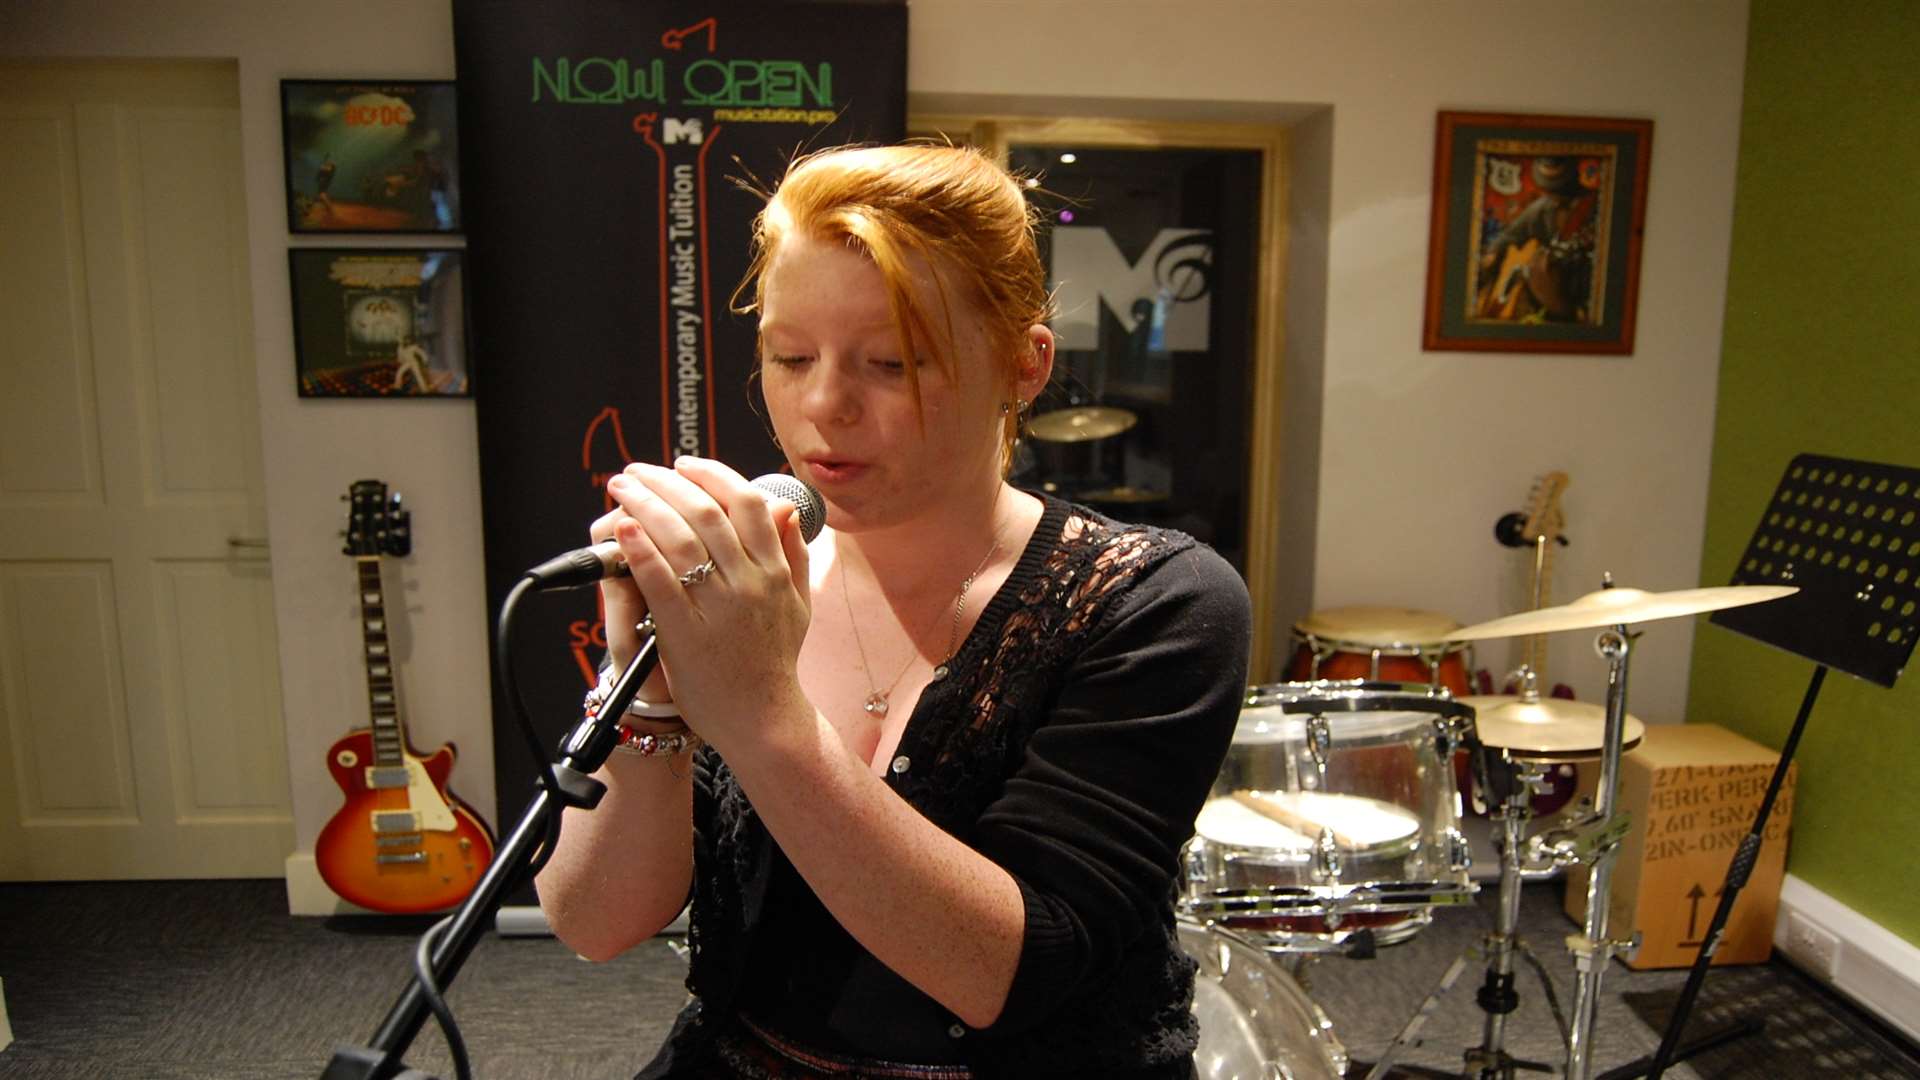 Staff at The Music Station in Tonbridge helped Elizabeth record her song